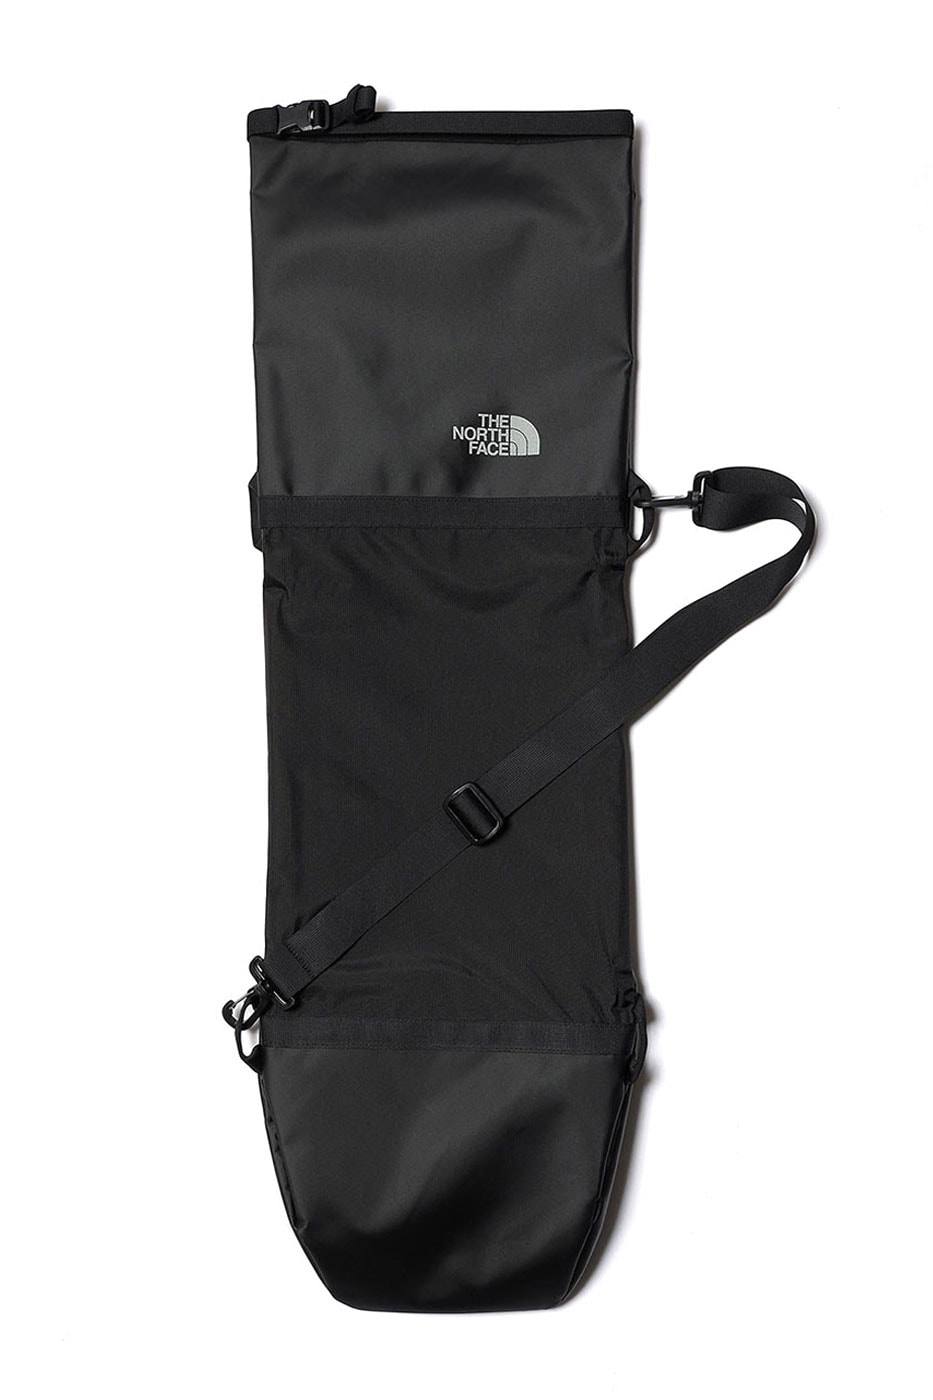 the north face standard wandereic skate bag collection carrying options pack 20 carrier duffel 70 sacochet roll up backpack deck storage release info price date